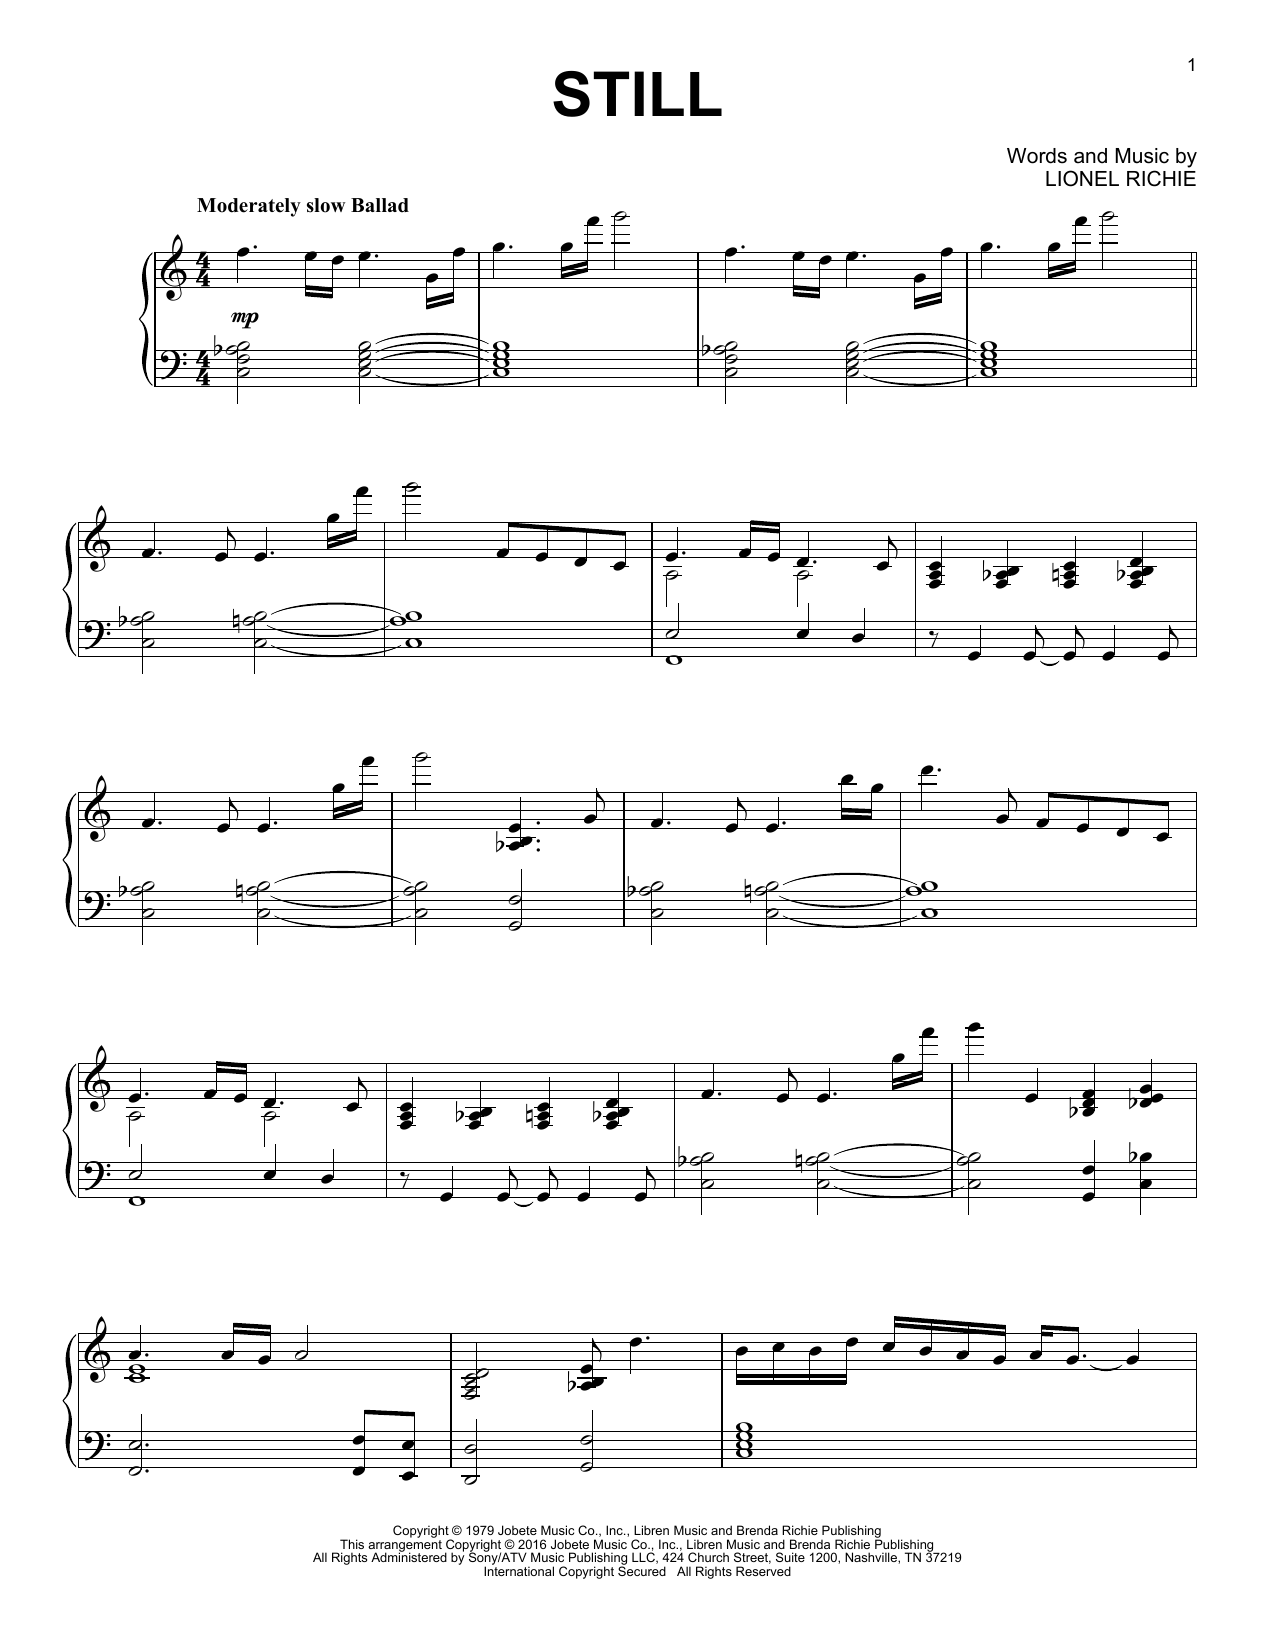 Commodores 'Nightshift' Sheet Music Notes, Chords, Score. Download  Printable PDF Score. in 2023